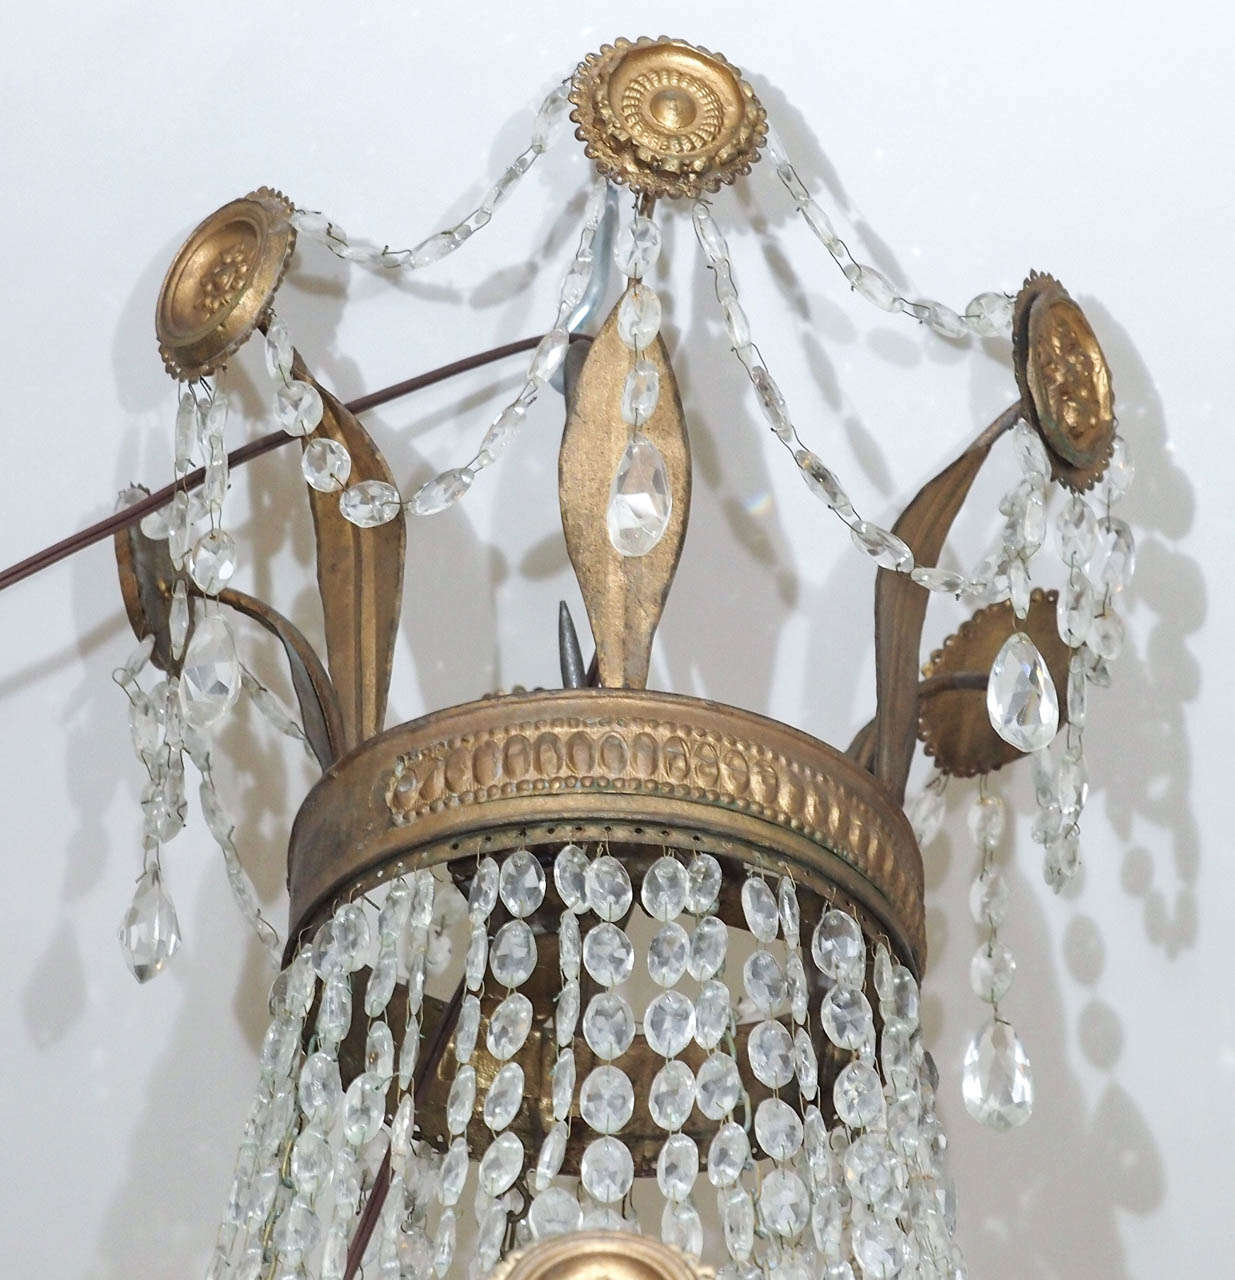 Italian Early 19th c. Empire Chandelier of stamped brass and crystal